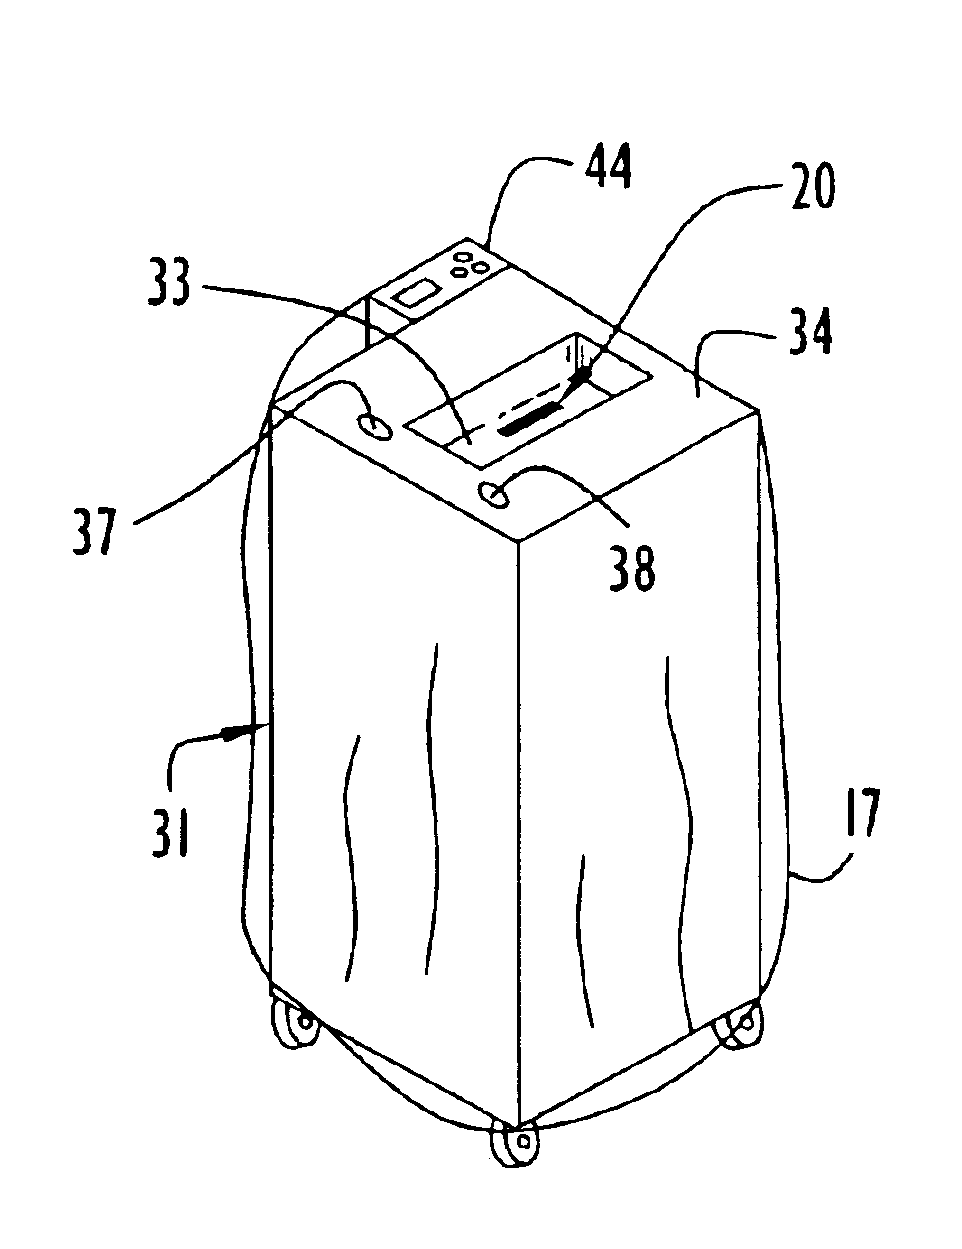 Medical solution thermal treatment system and method of controlling system operation in accordance with detection of solution and leaks in surgical drape containers